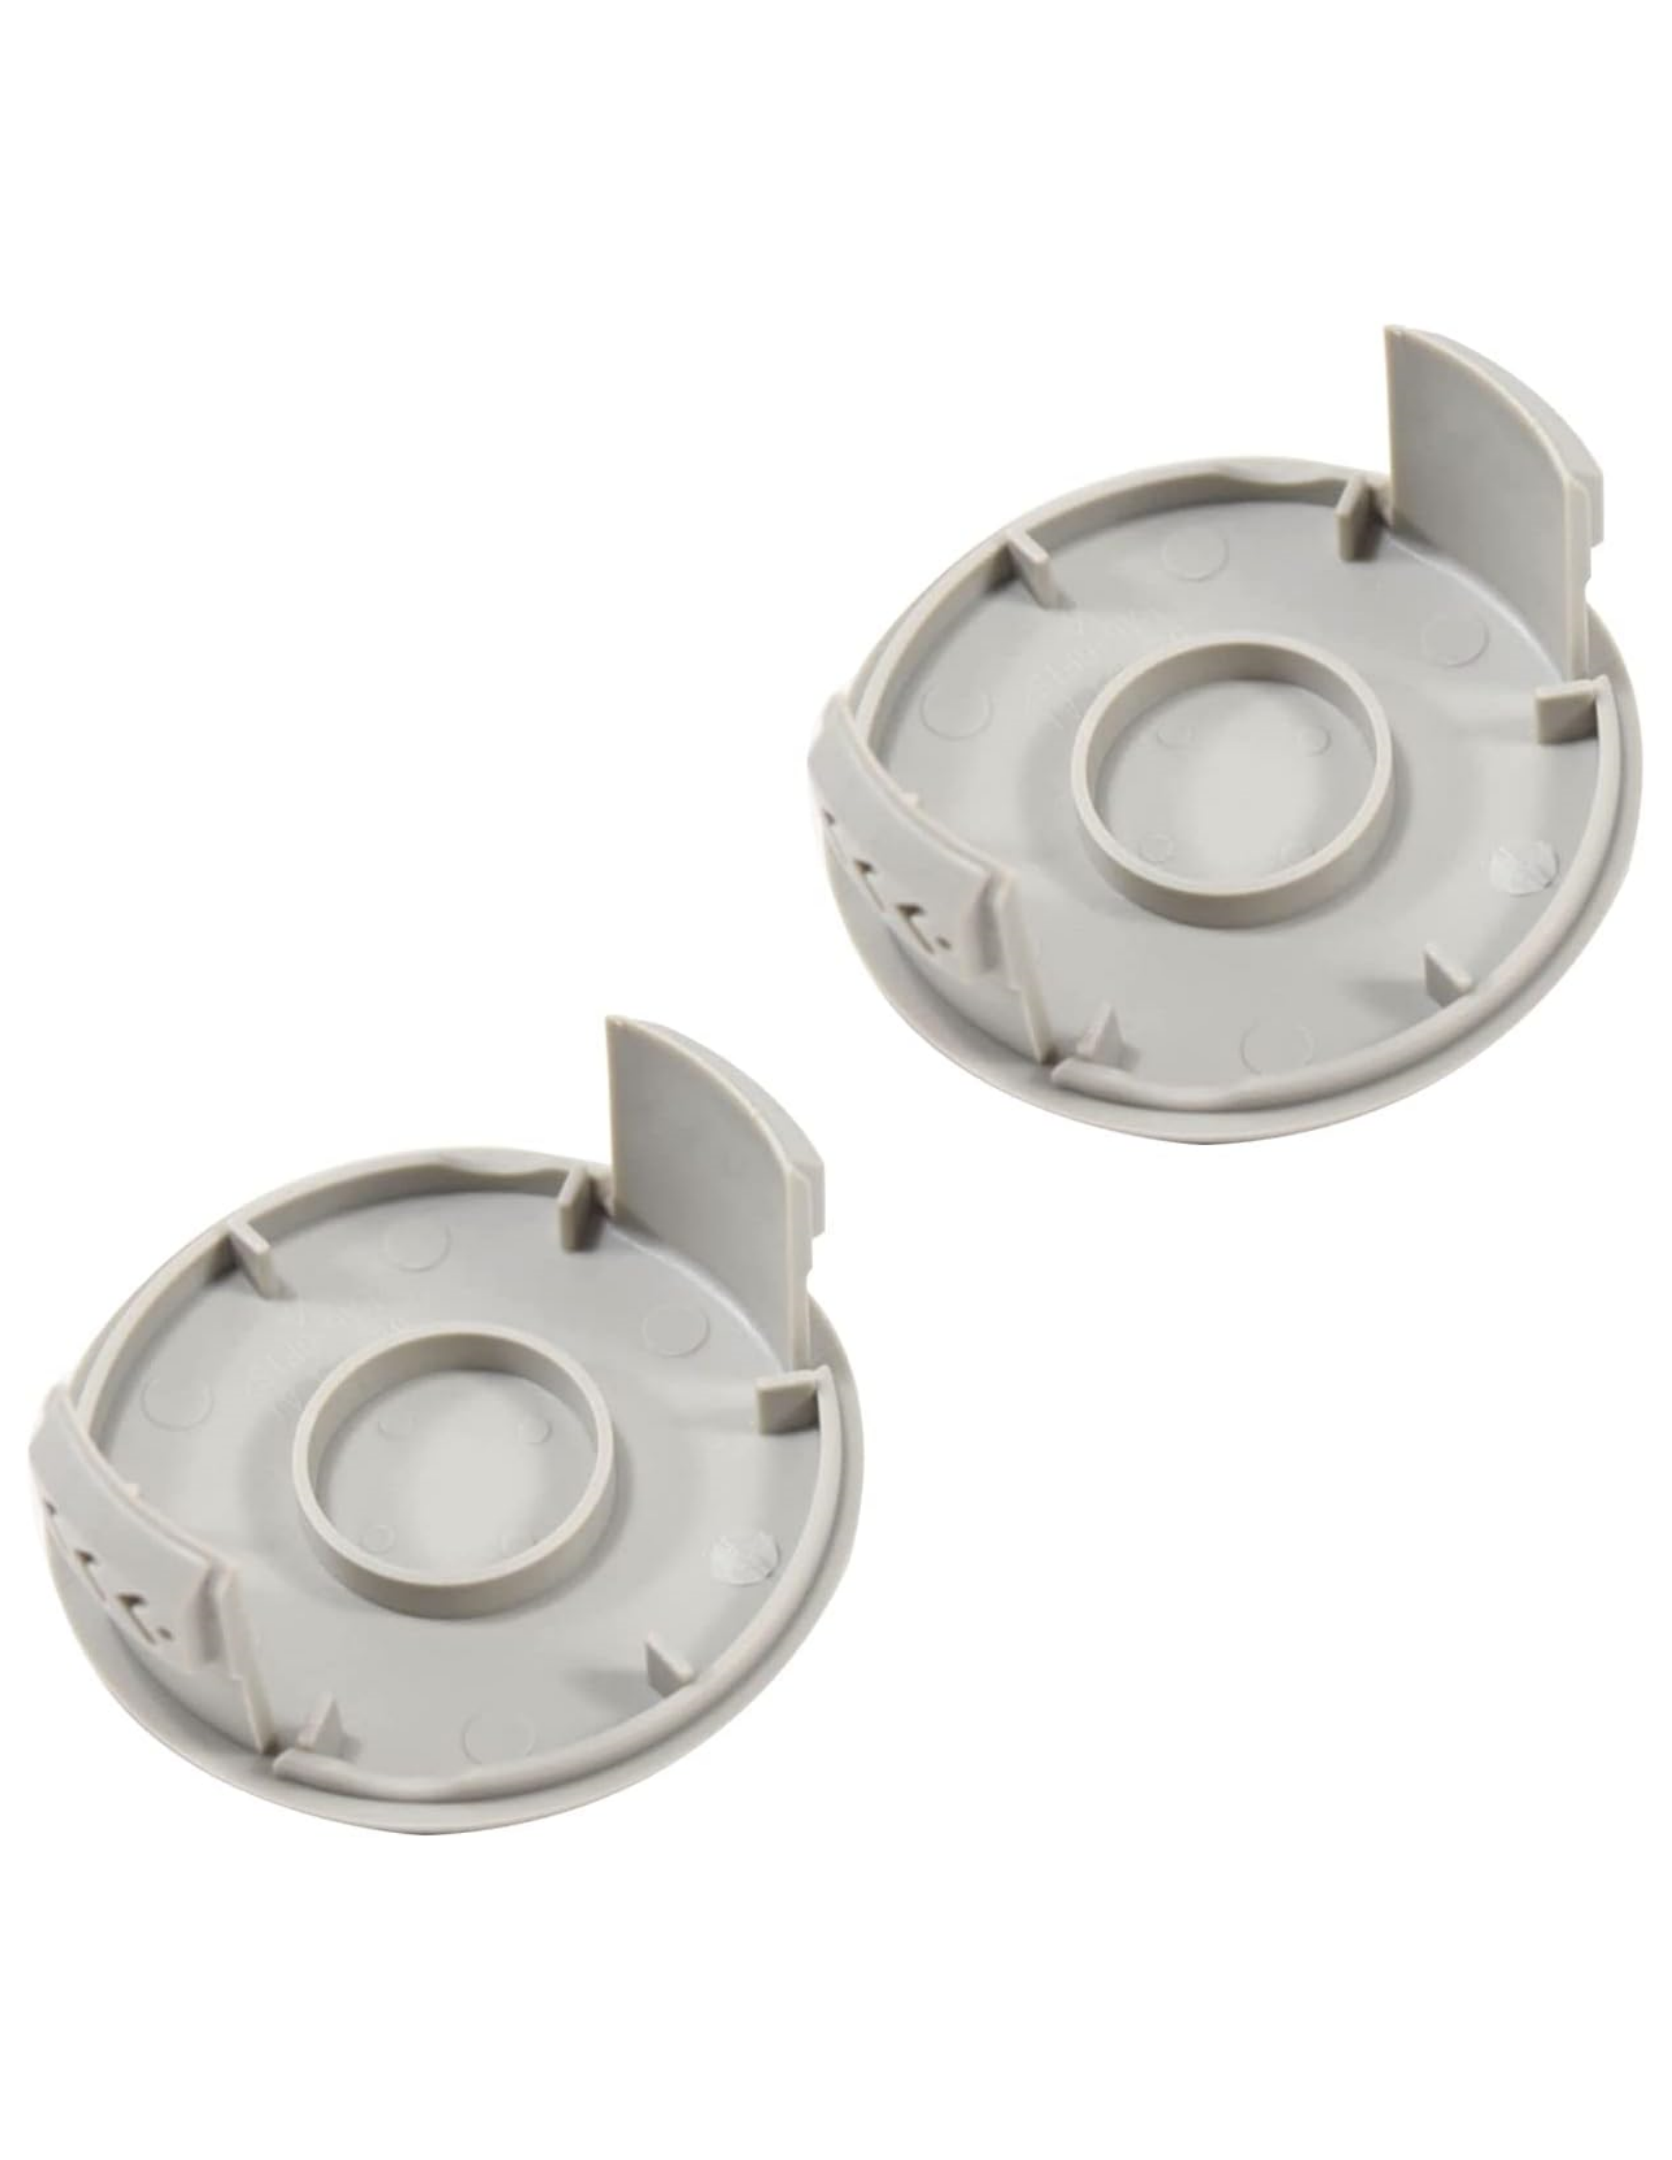 THTEN Craftsman 522994001 Trimmer Spool Cap Covers Compatible with Craftsman 64212 24V (2 Pack)